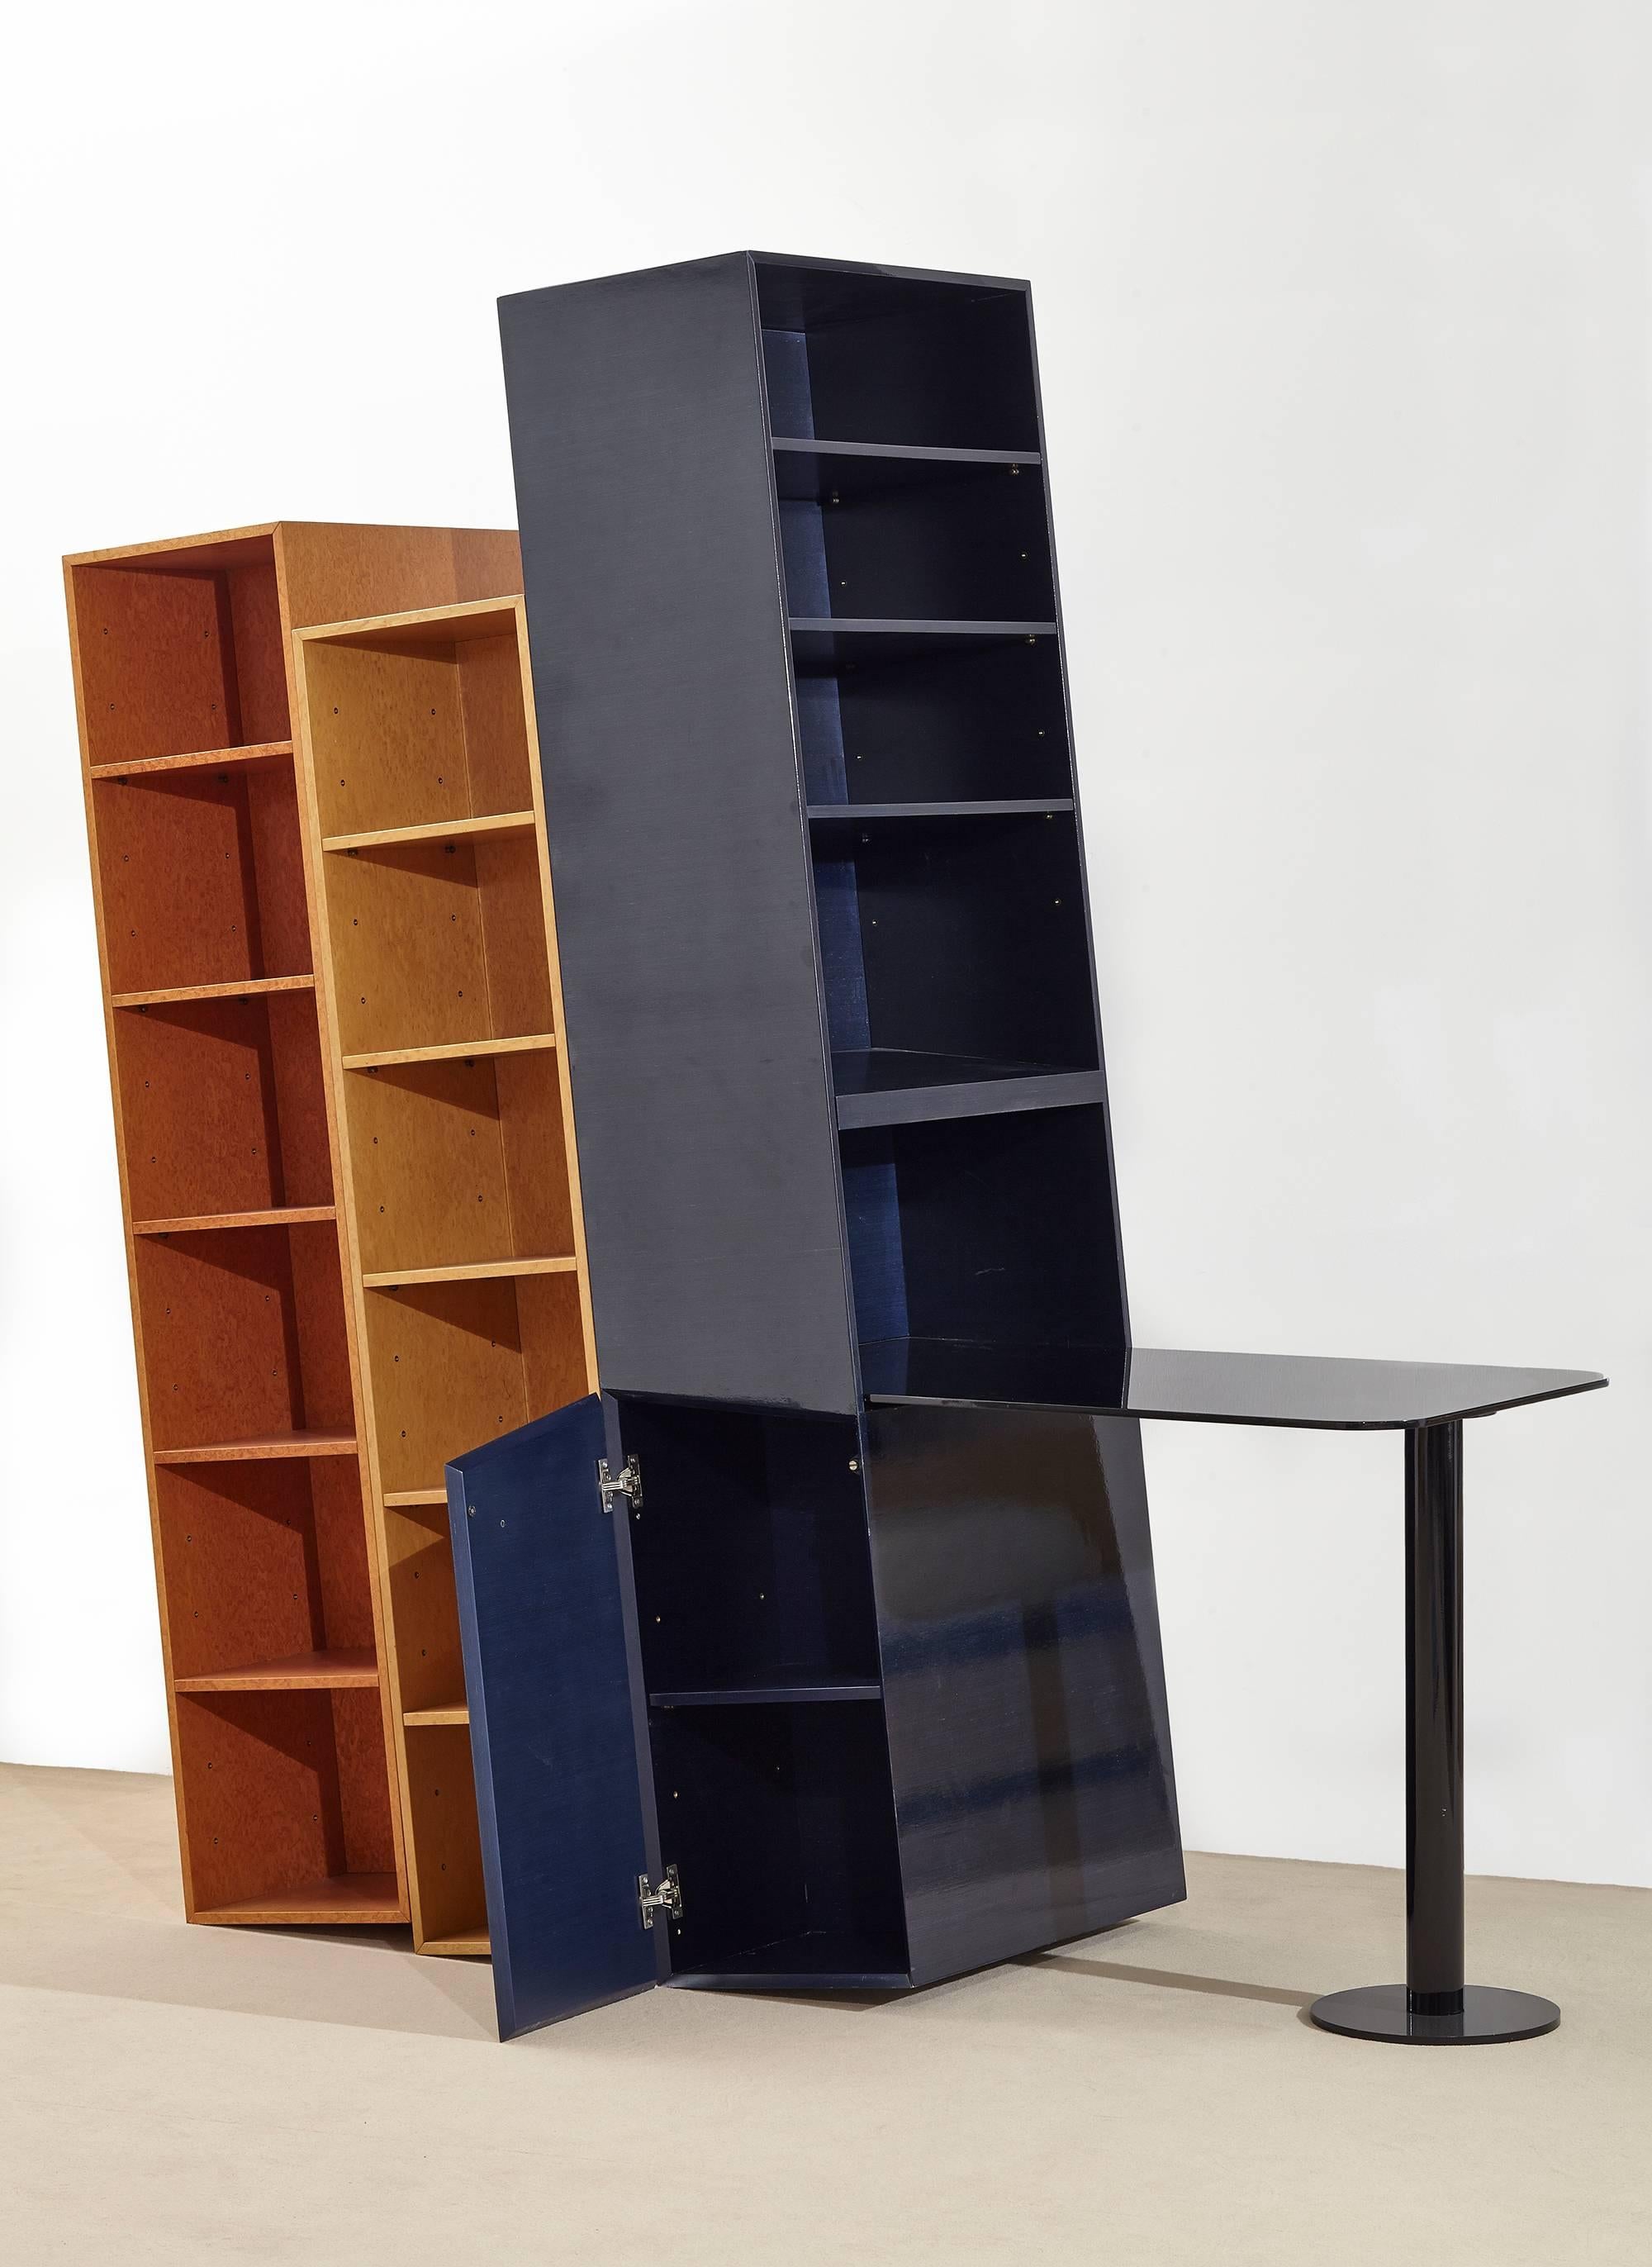 Kampa is a three-piece bookcase with built in table designed by Ettore Sottsass as part of the 